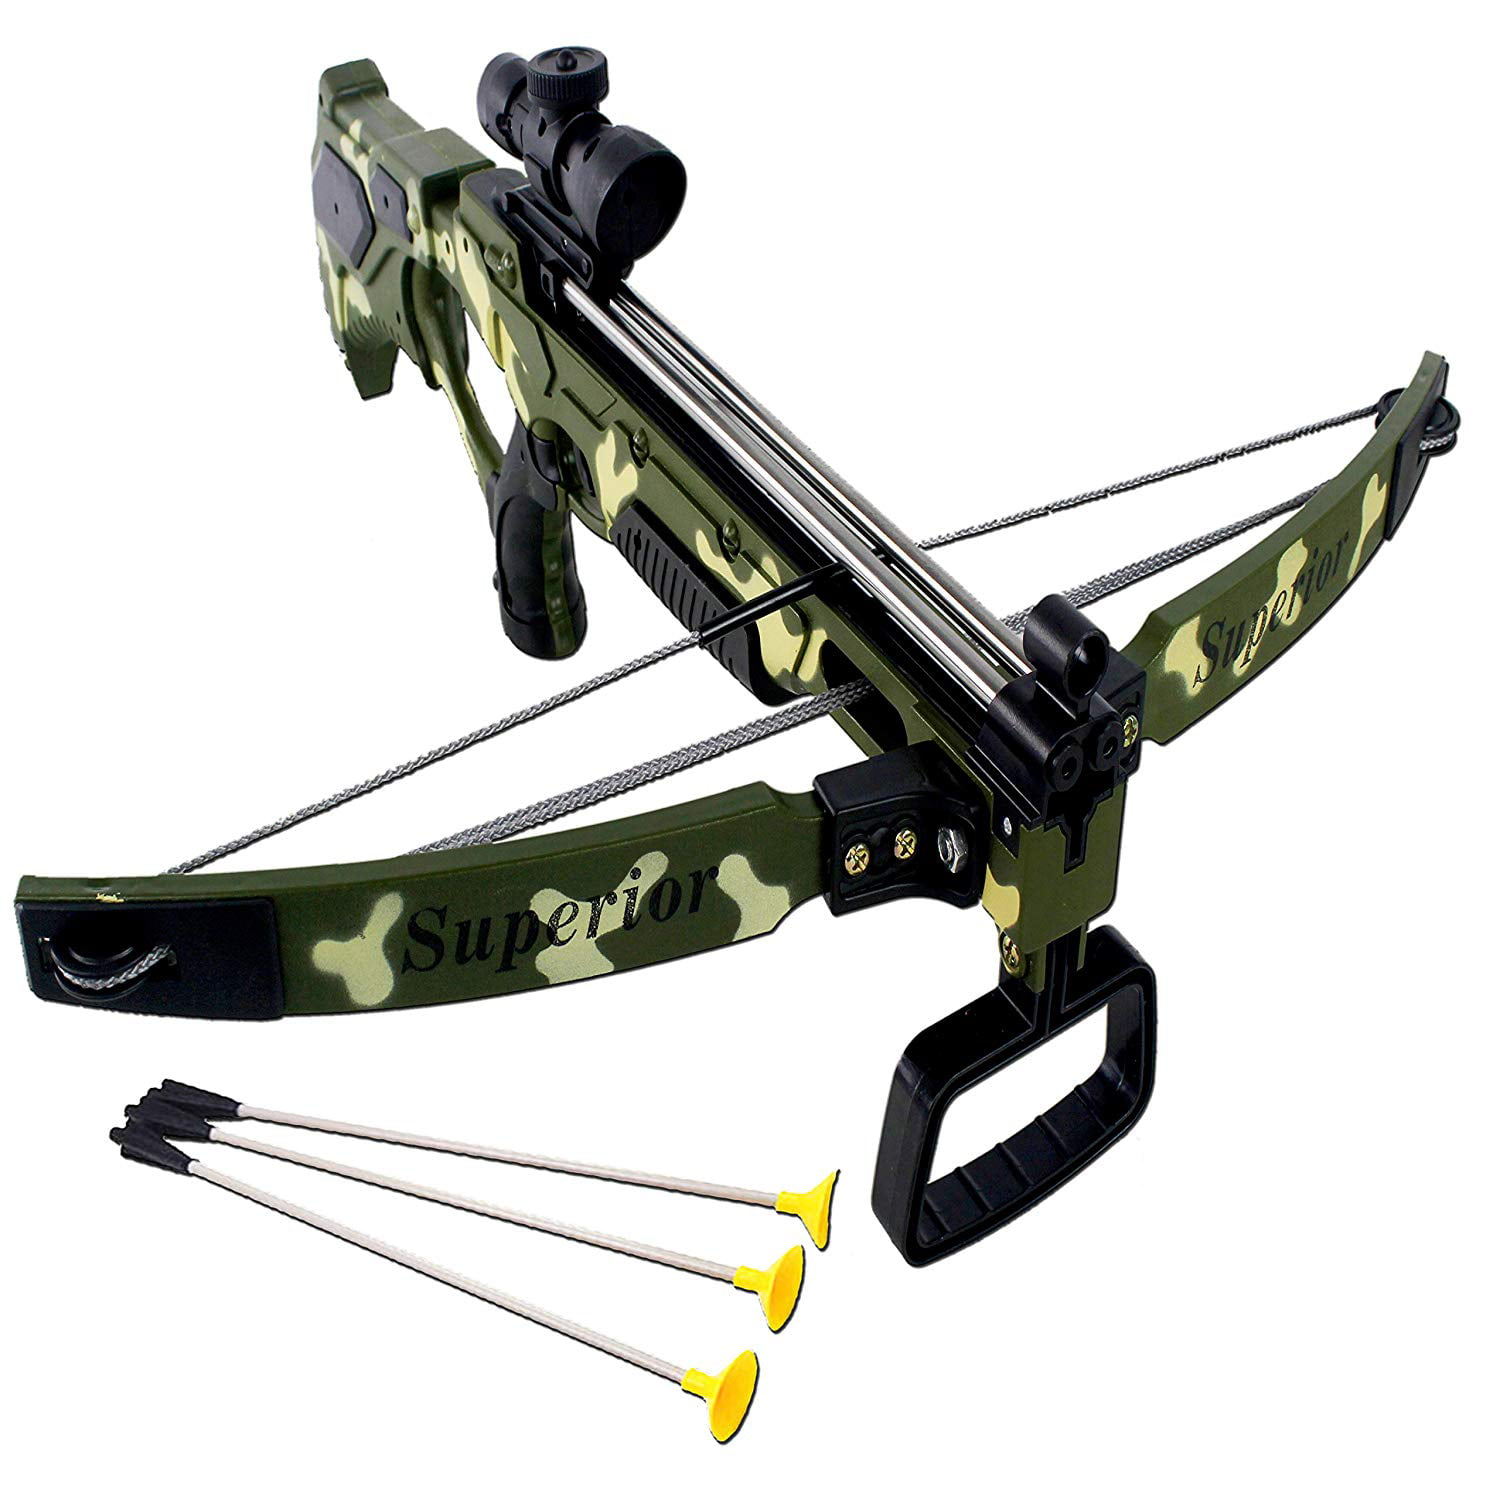 26 In Green Toy Compound Crossbow Set By Realtree At Fleet, 51% OFF